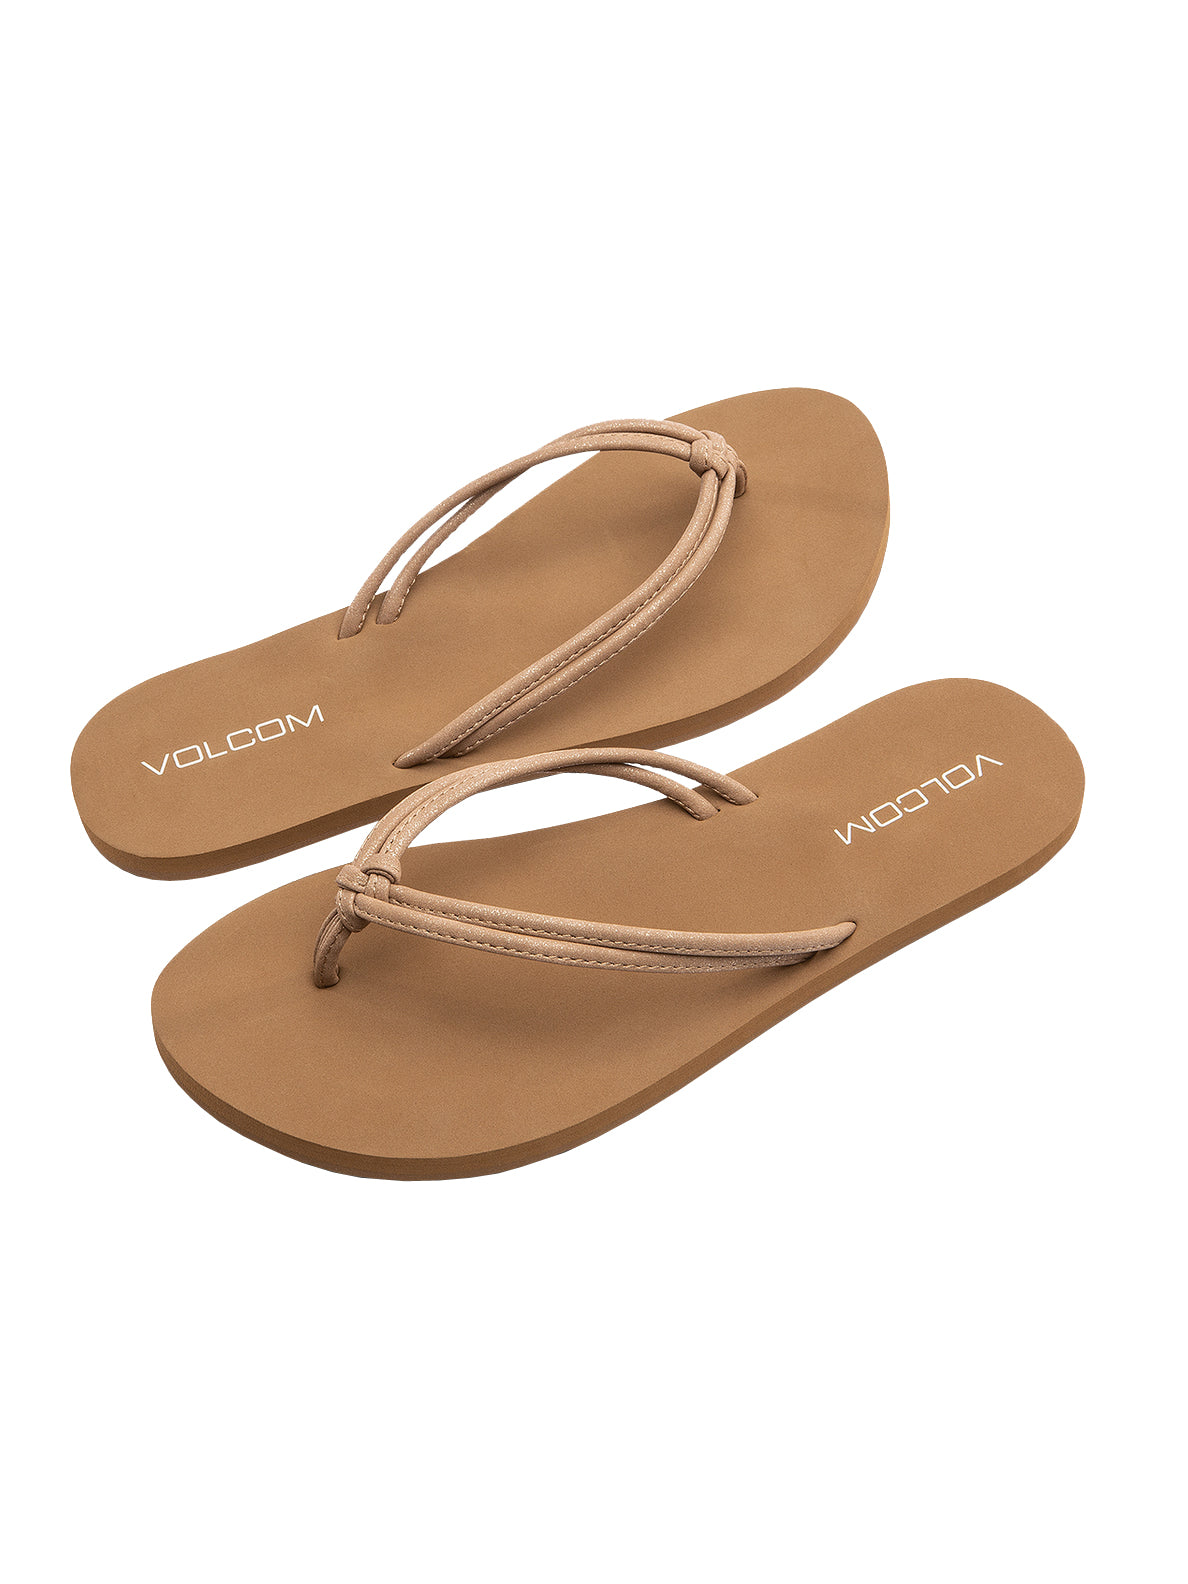 Volcom Forever and Ever 2 Womens Sandal TAN23-Tan 10